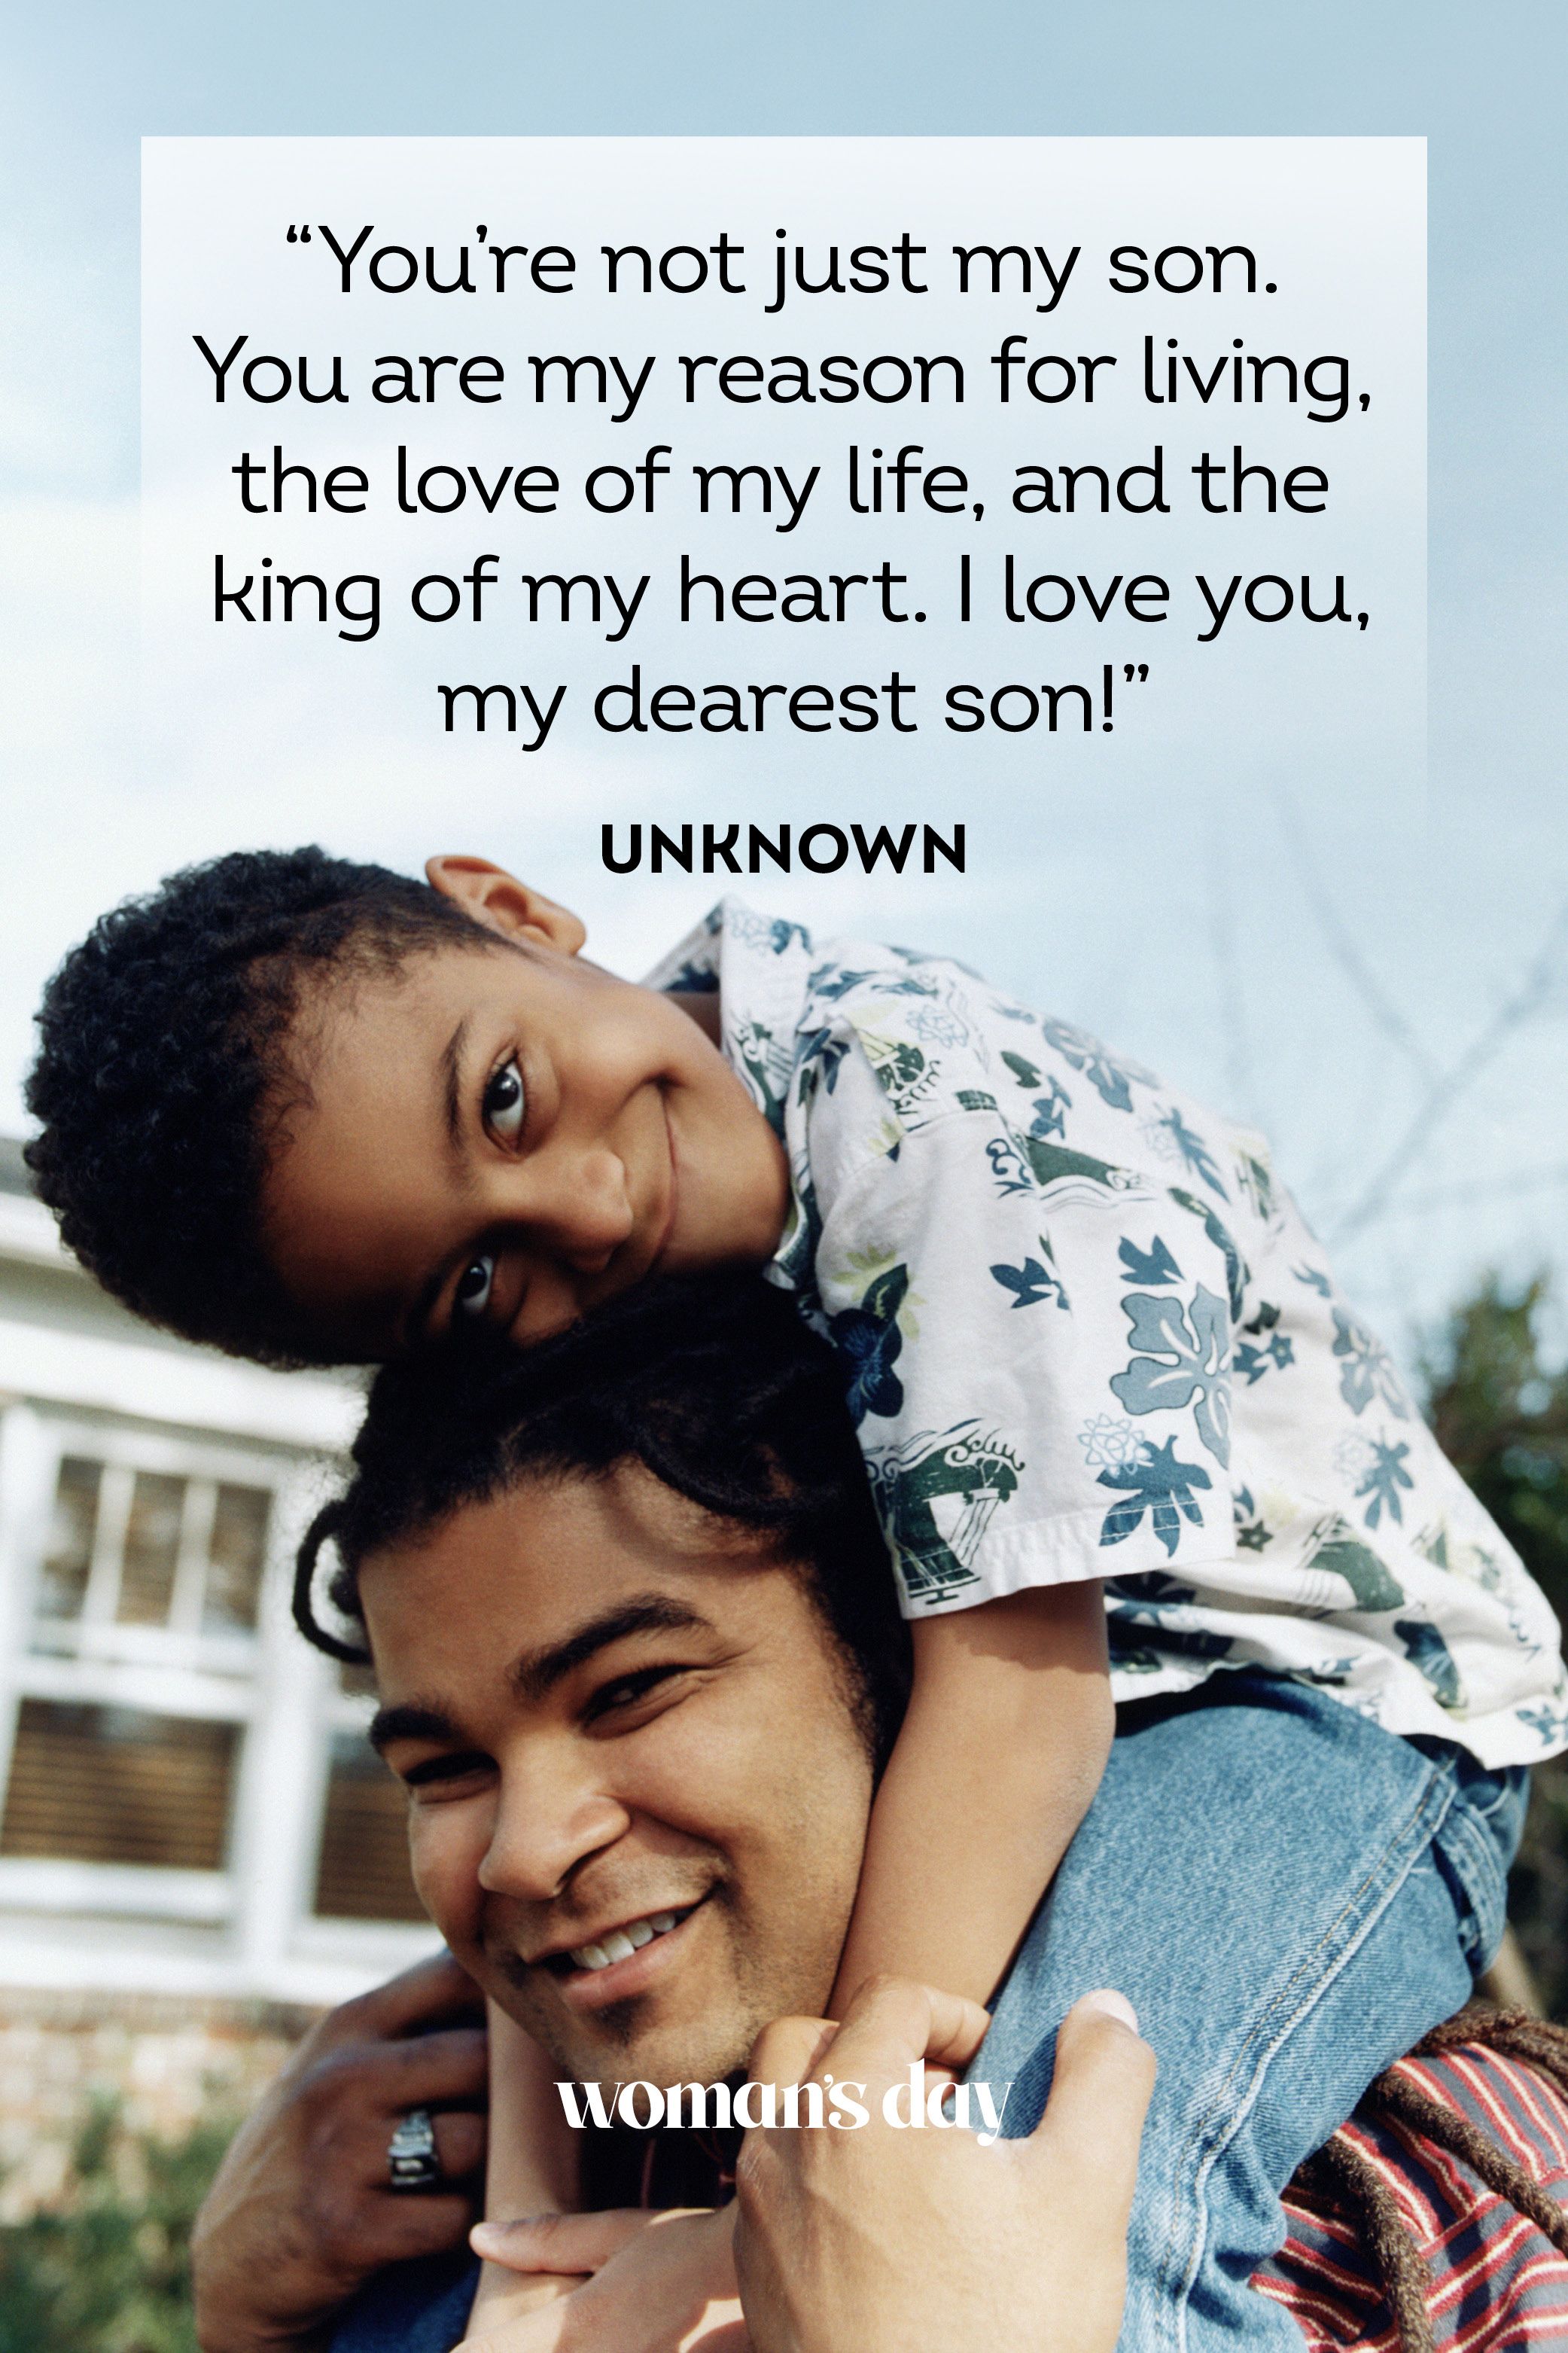 i love you dad quotes